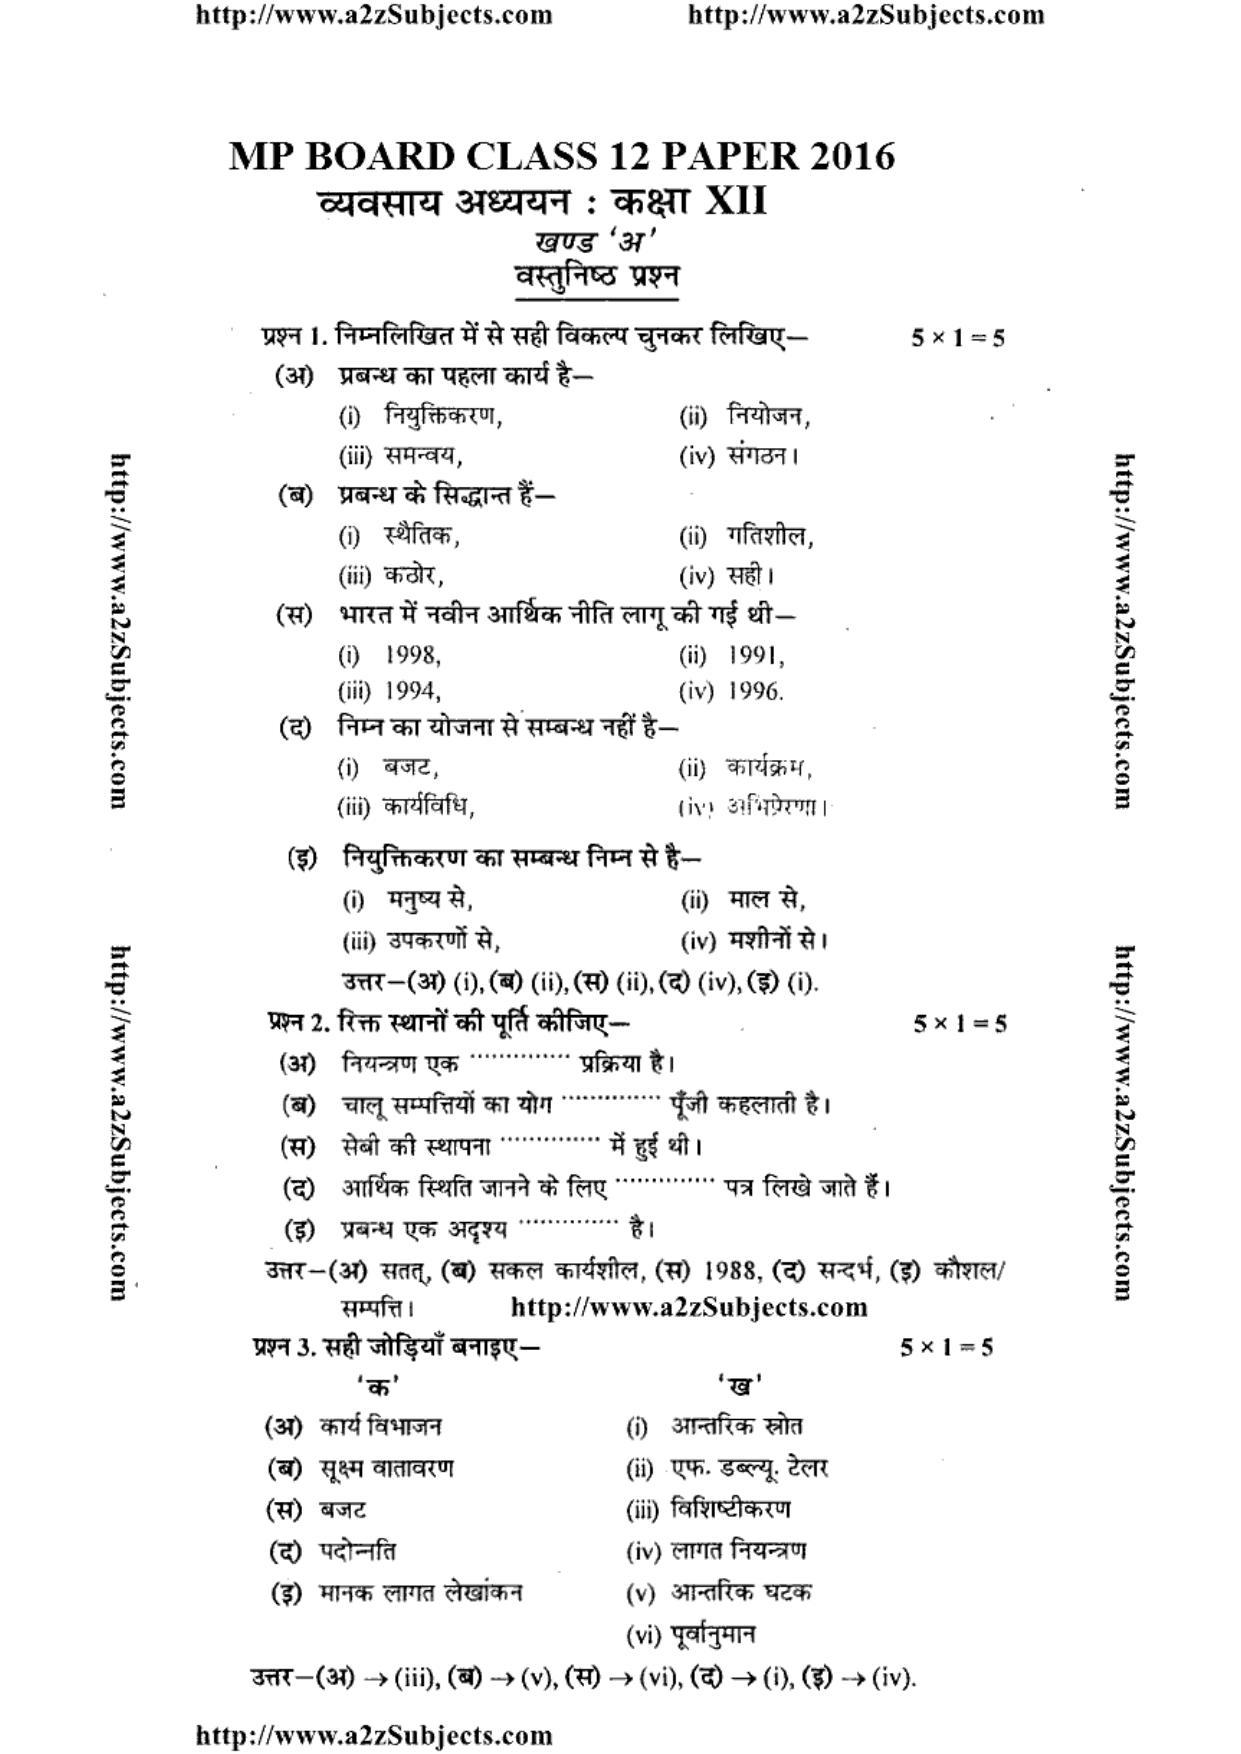 MP Board Class 12 Professional Studies 2016 Question Paper - Page 1